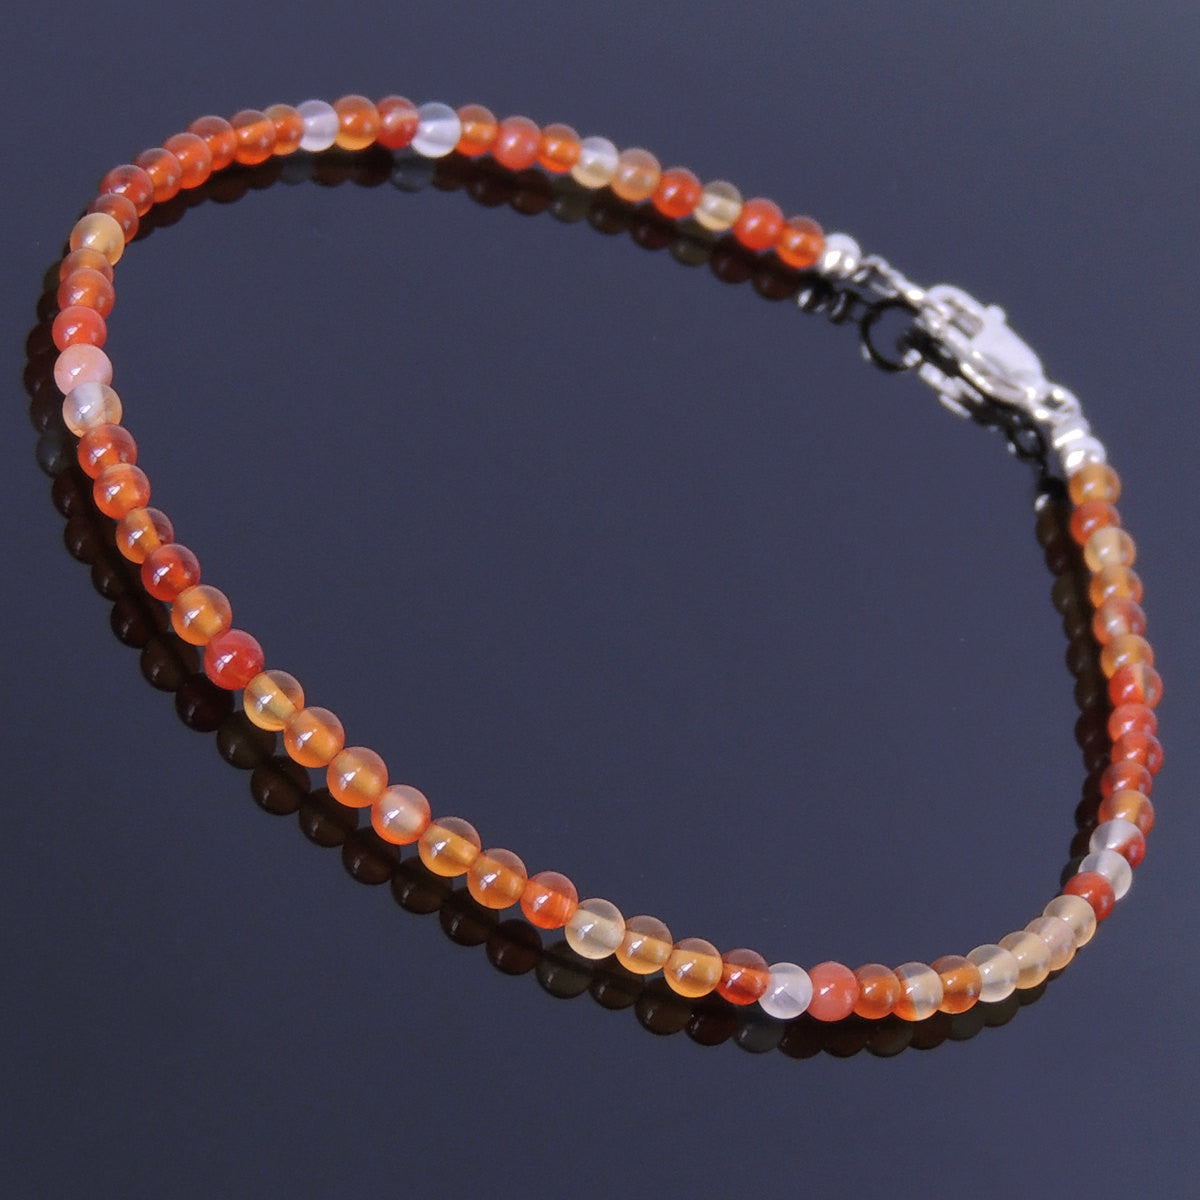 3mm Red Carnelian Healing Gemstone Anklet with S925 Sterling Silver Spacer Beads & Clasp - Handmade by Gem & Silver AN015